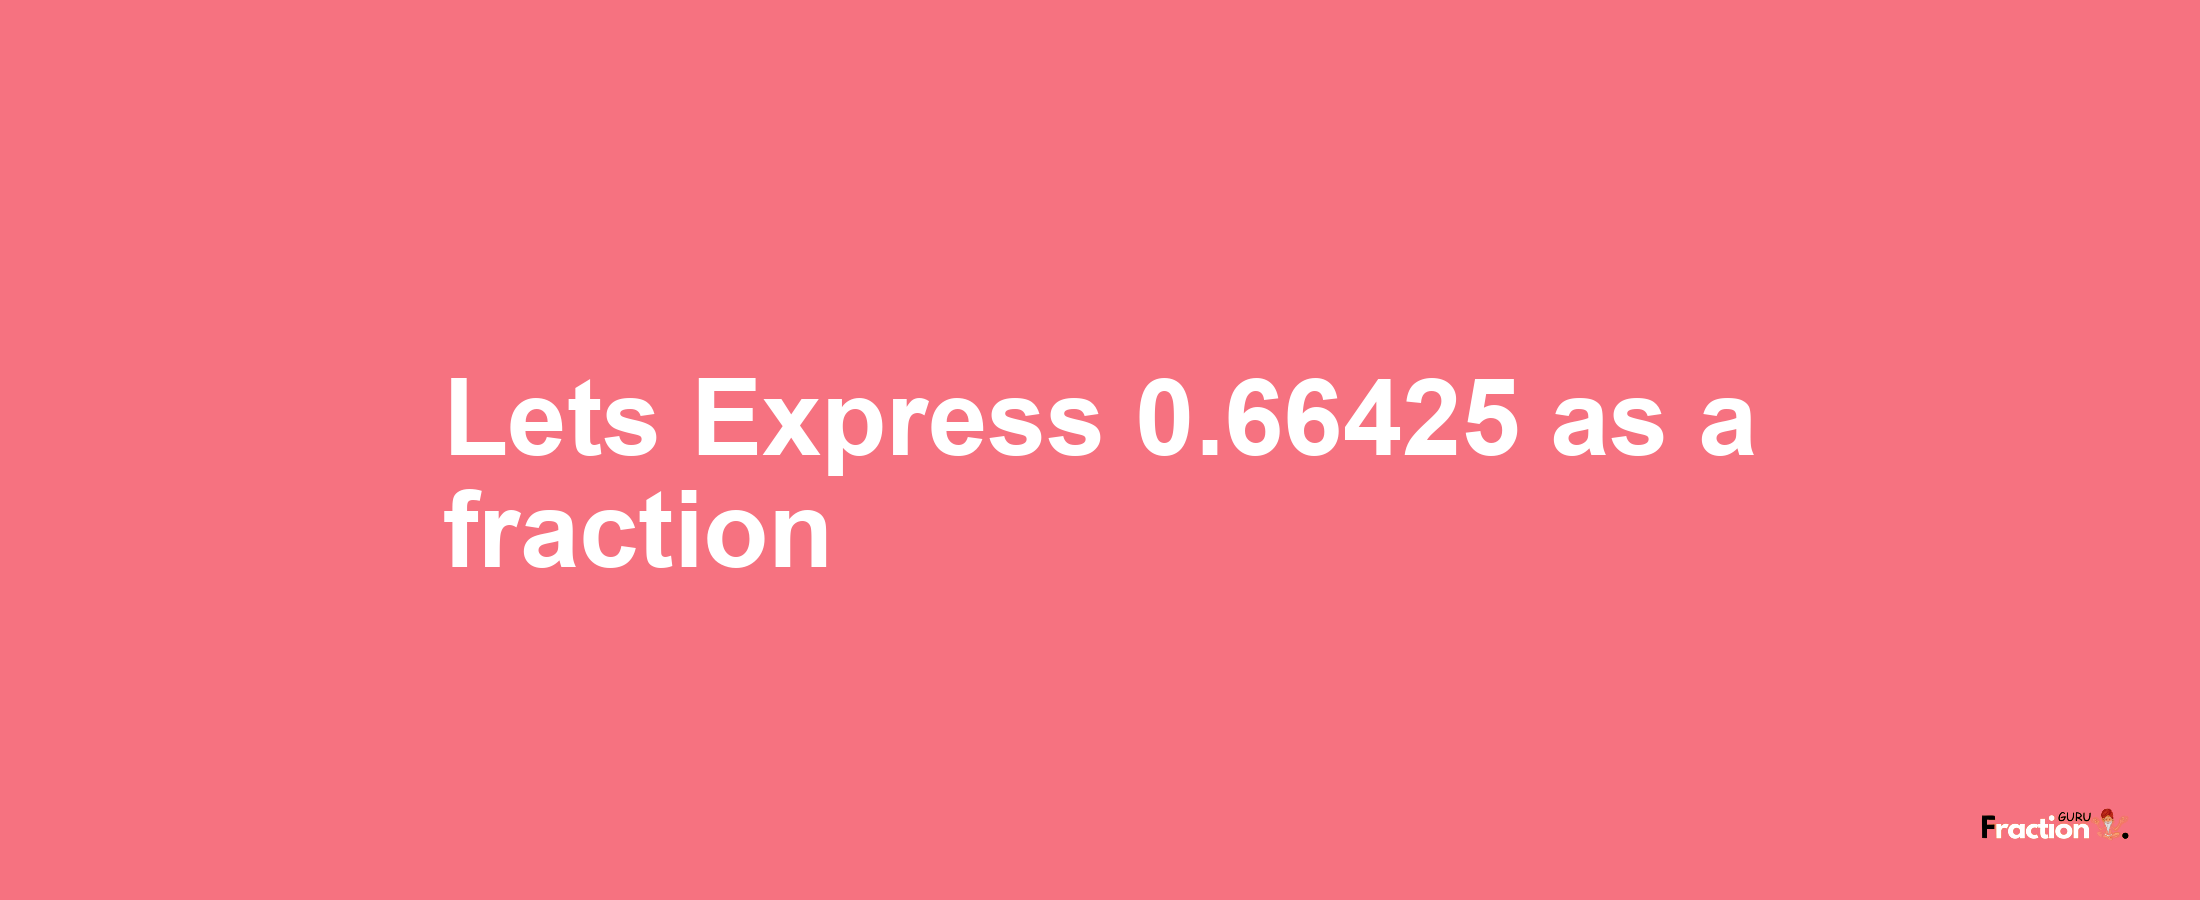 Lets Express 0.66425 as afraction